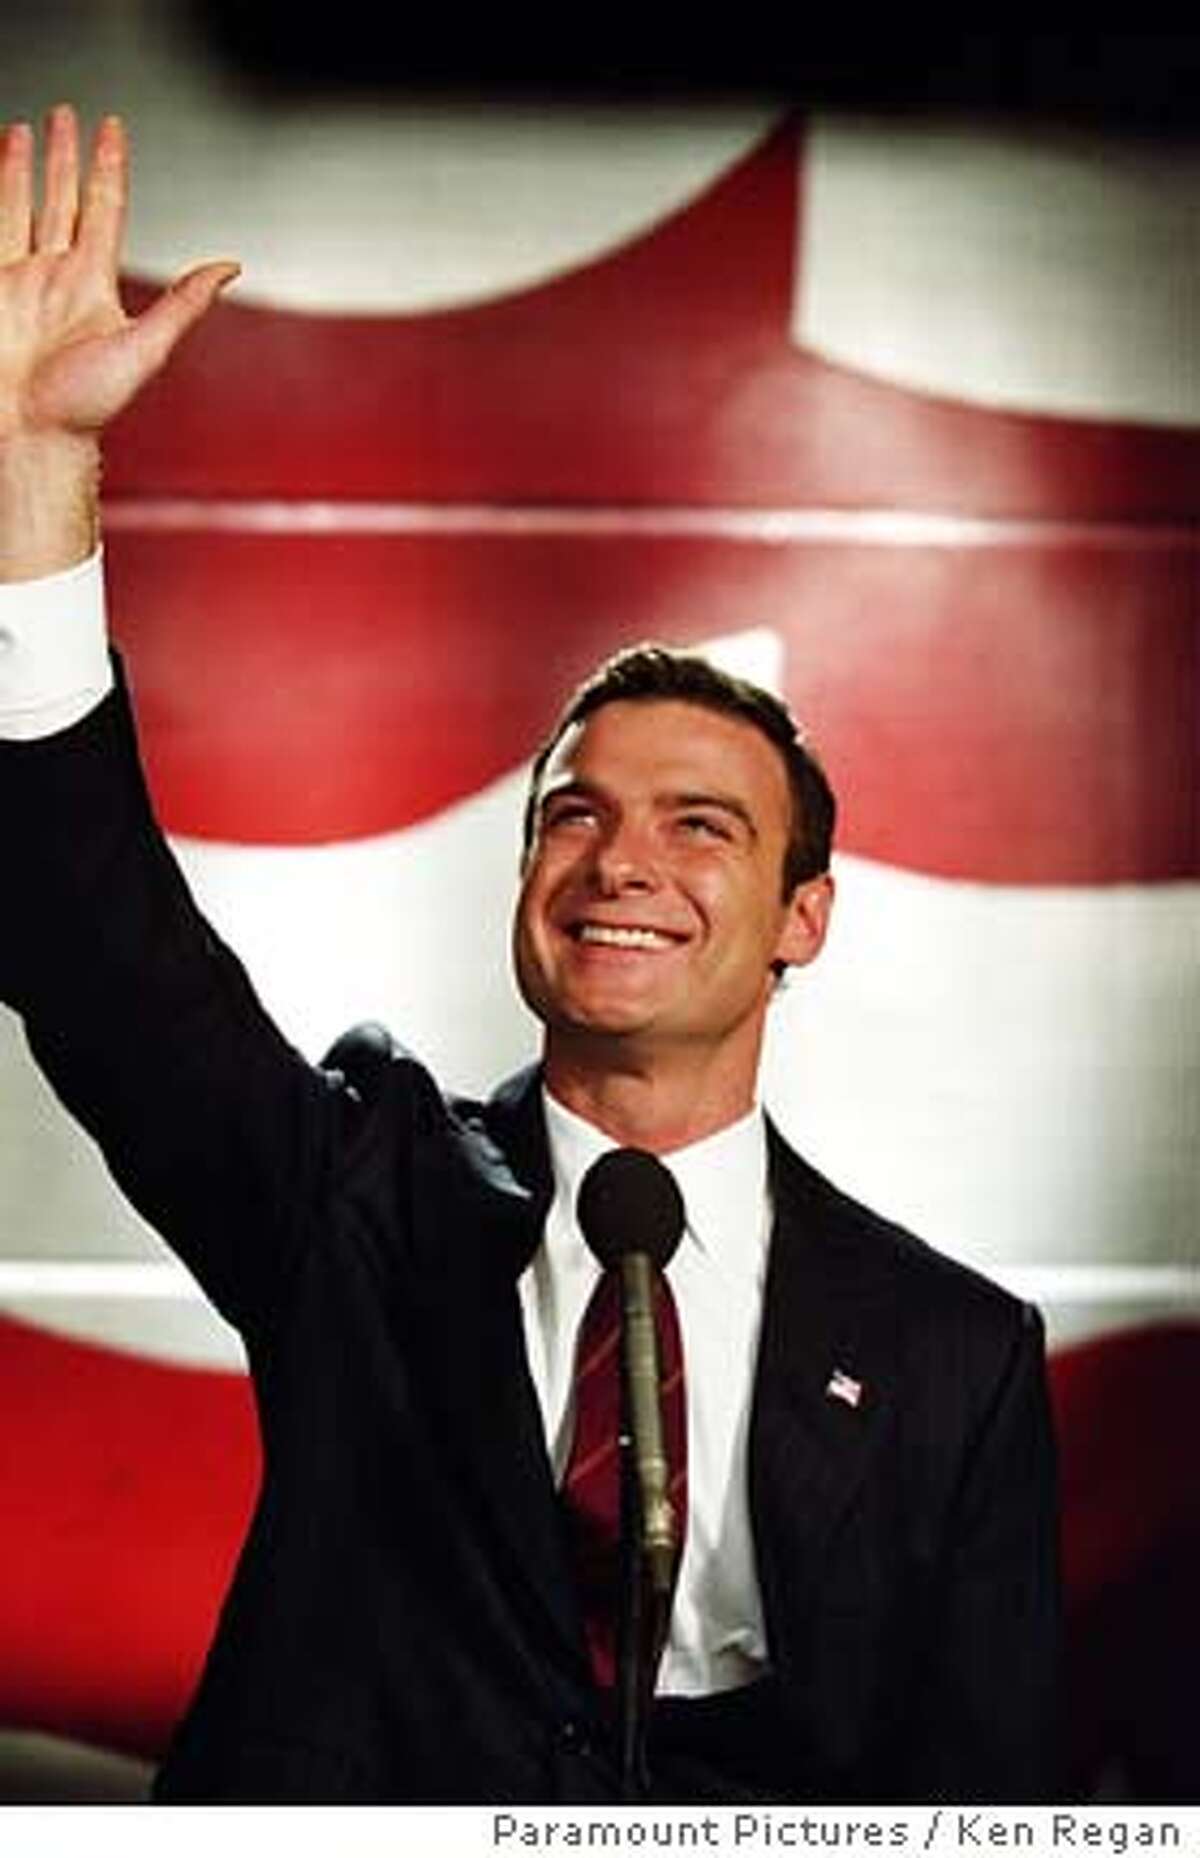 Liev Schreiber plays a hero-turned-politician. Paramount Pictures photo by Ken Regan